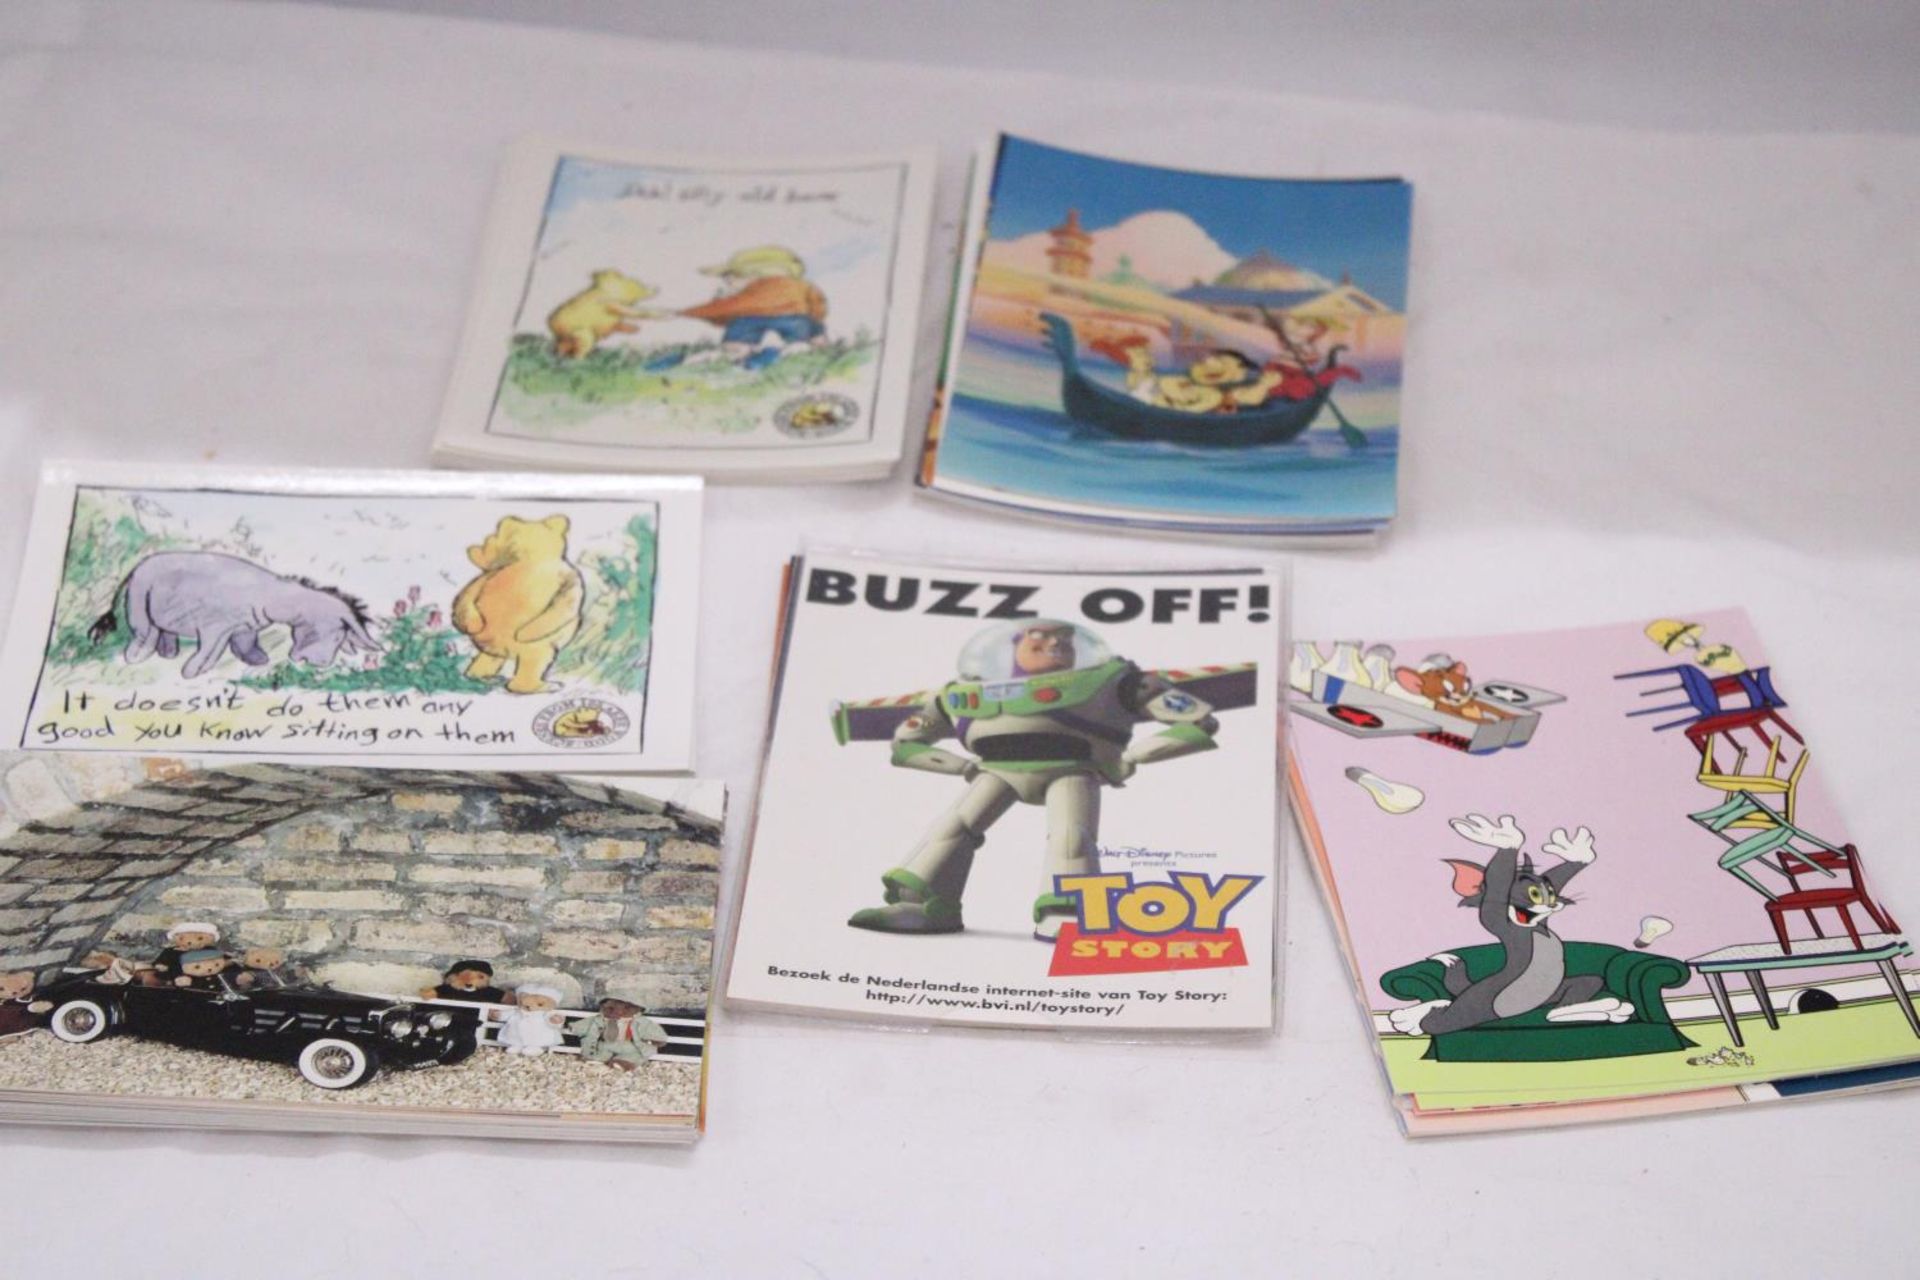 A COLLECTION OF WINNIE THE POOH, THE FLINSTONES AND TOM AND JERRY POSTCARDS - Image 5 of 5